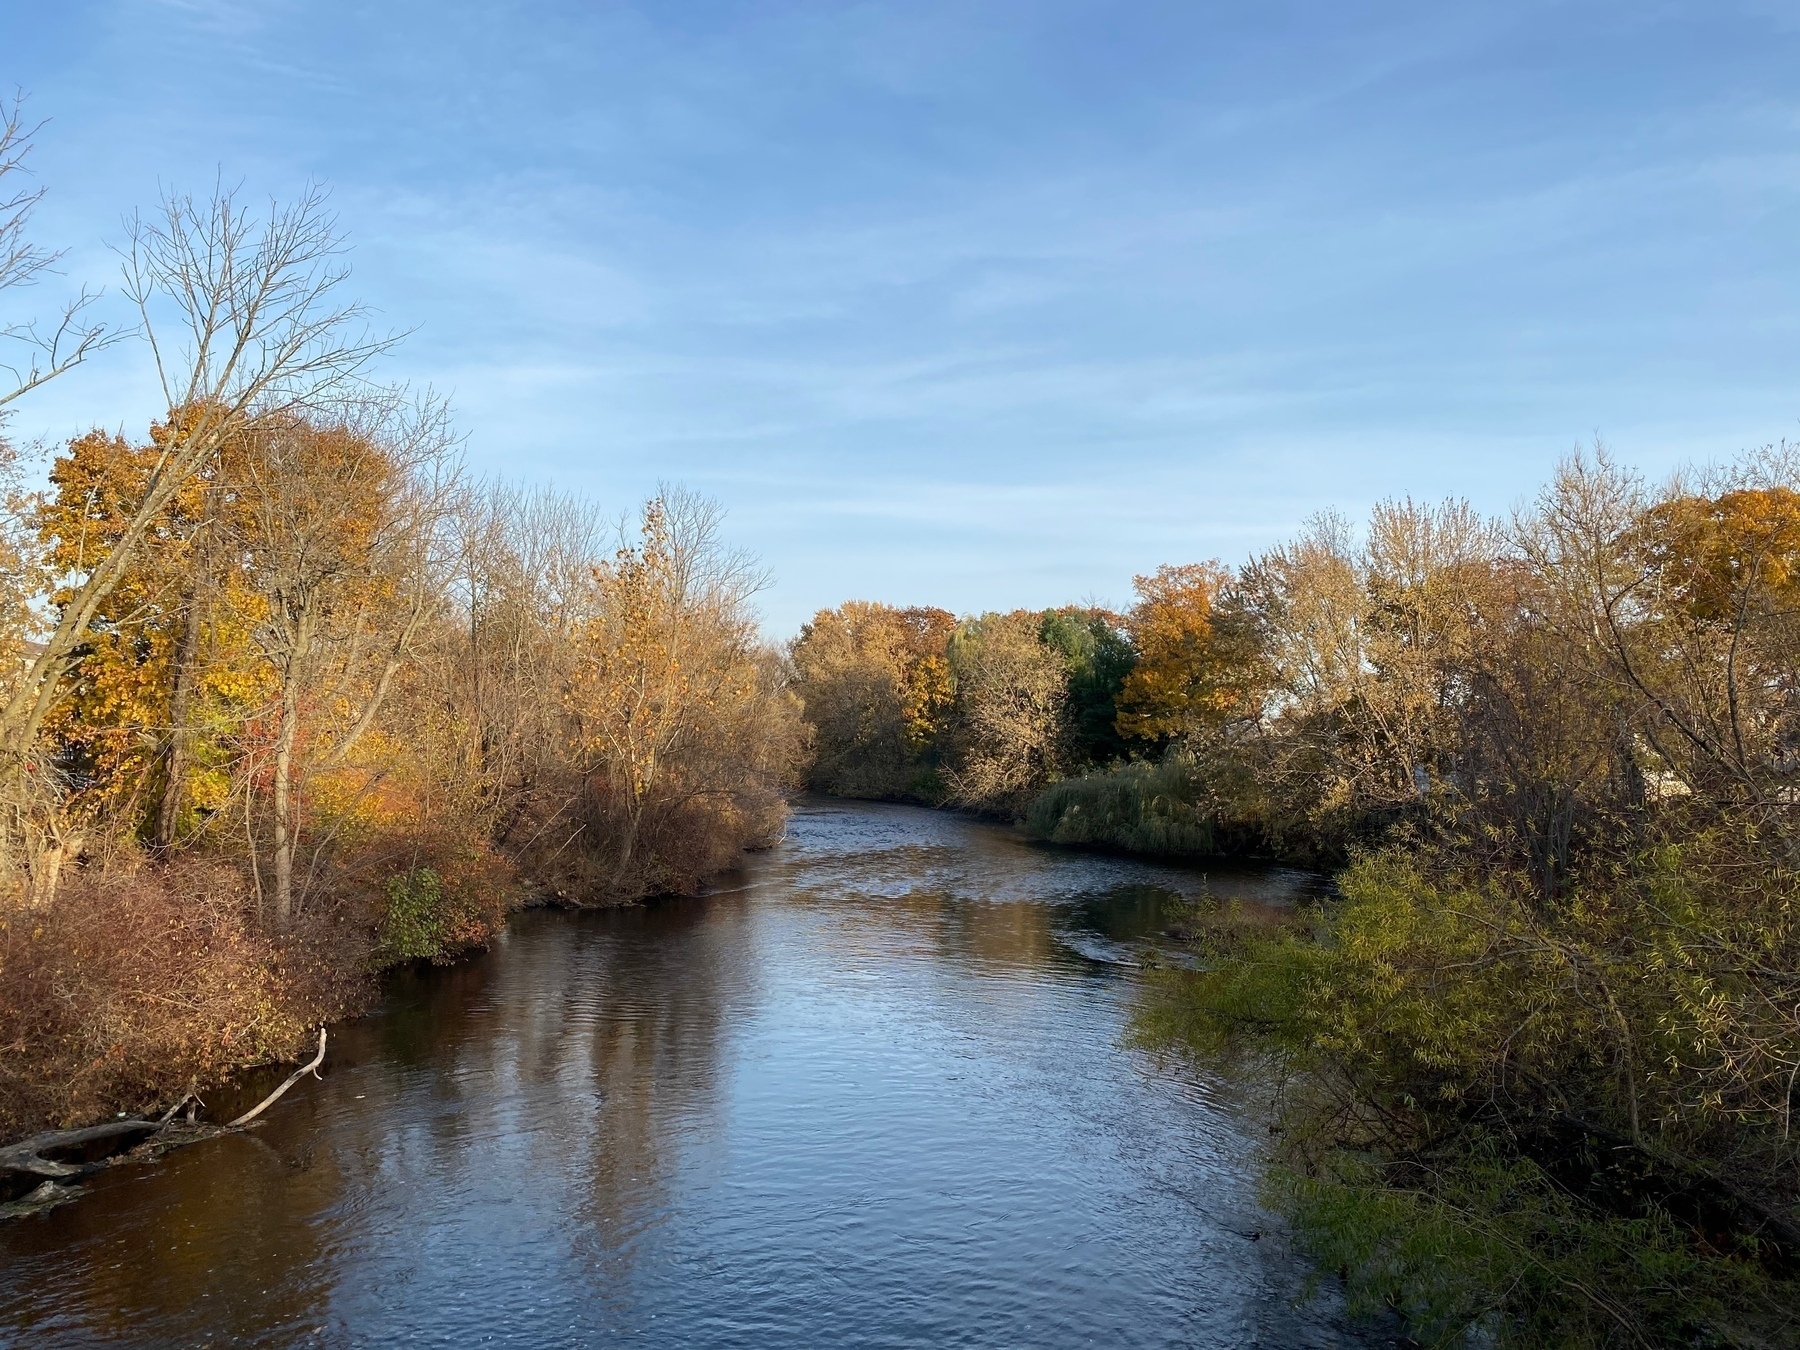 View of a river with trees in fading fall colors along each bank.